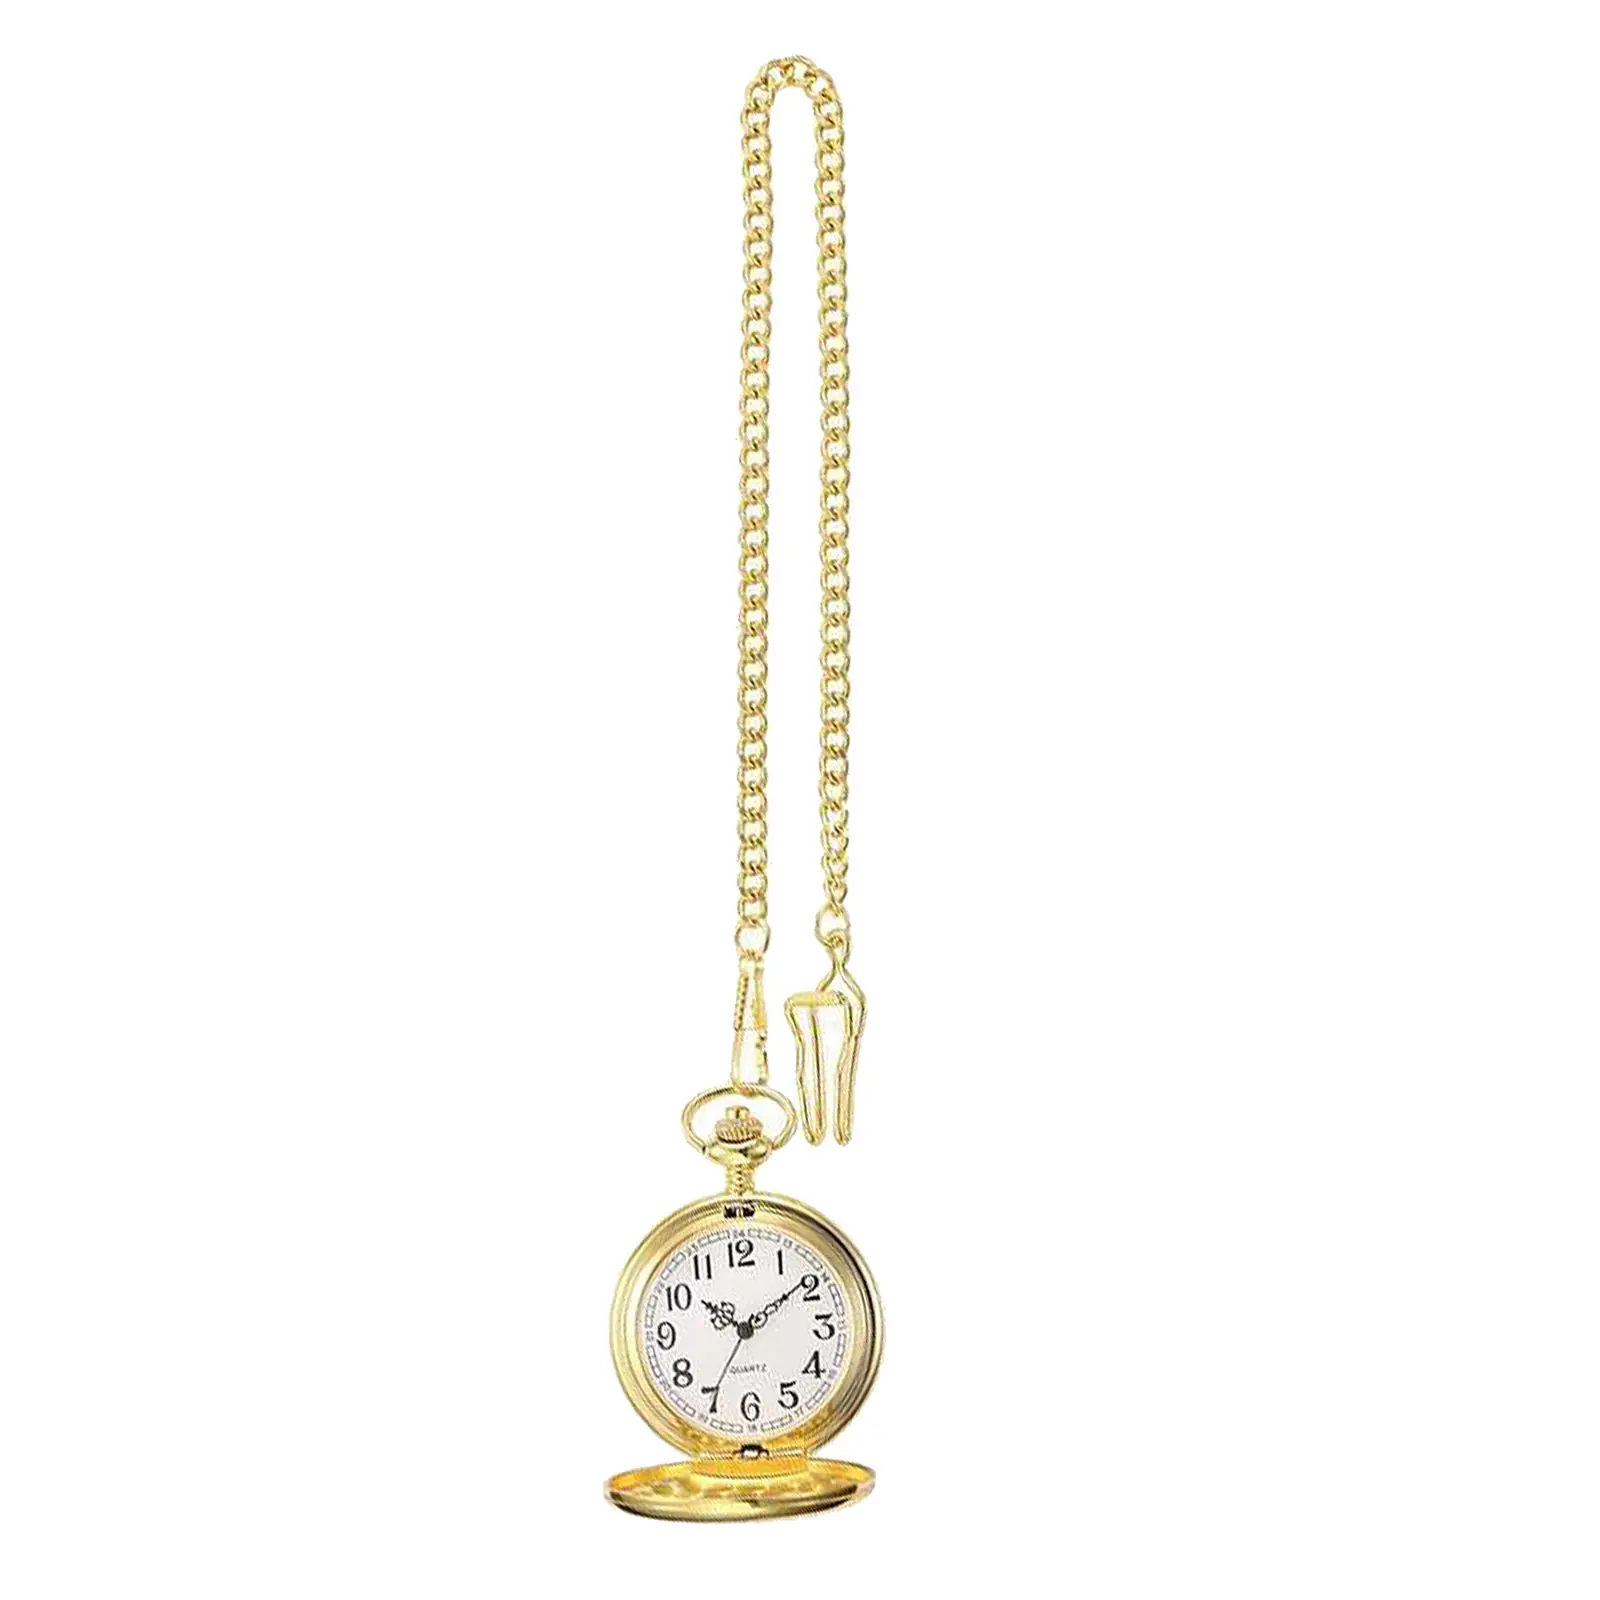 Gold Plated Quartz Pocket Watch Classic Fob Pocket Watch for Anniversary Day, Father`s Day